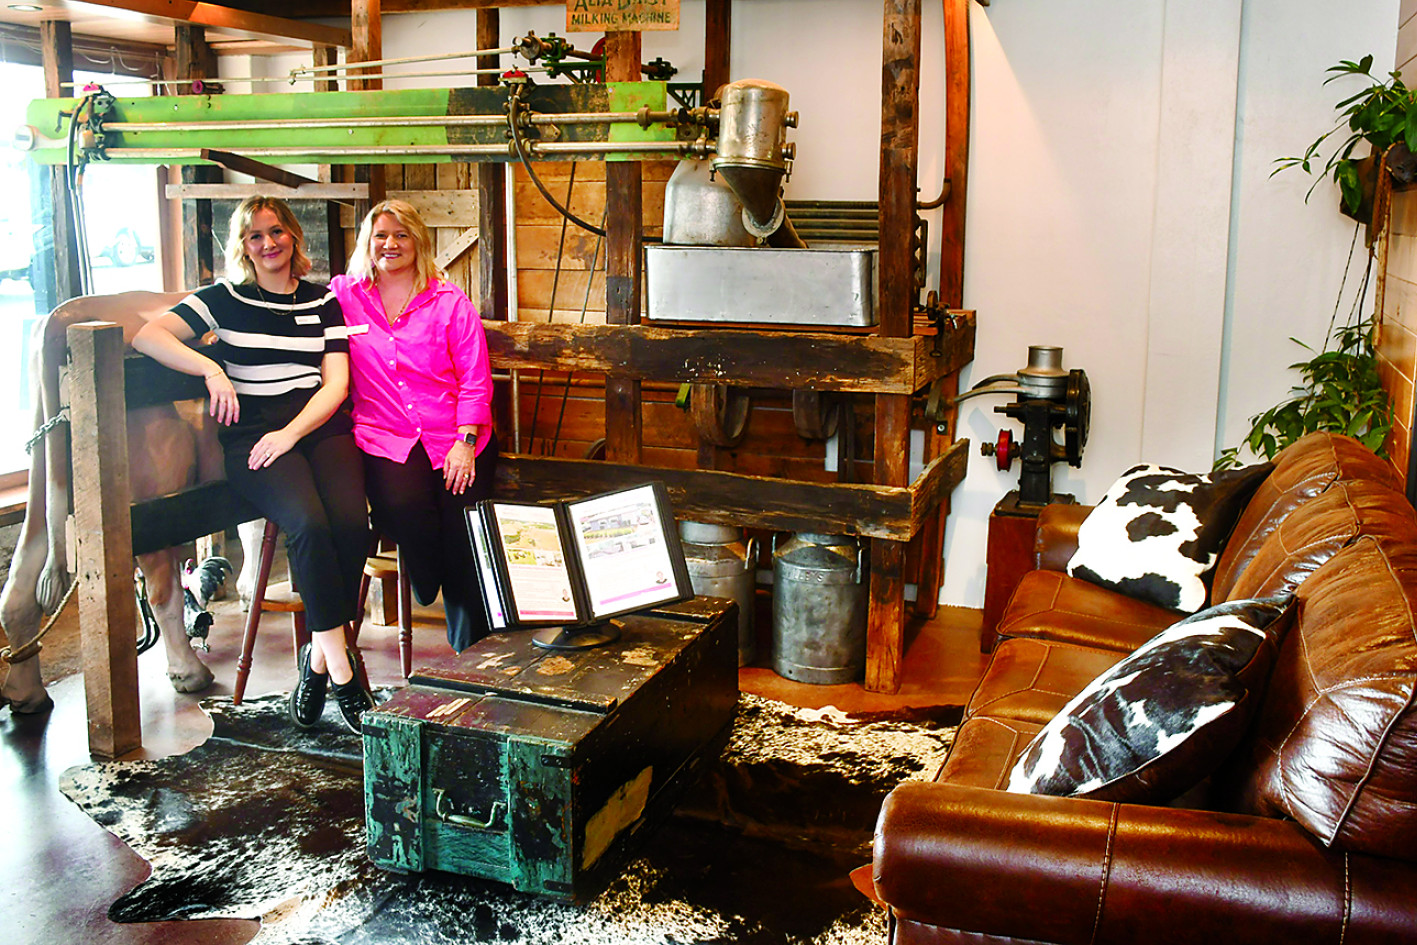 INSIDE: Shellie Nightingale and her daughter, Sasha, in their new business premises which features a variety of vintage equipment from the dairy and timber cutting industries, while the desks, front counter and other furniture have been made from reused timber.